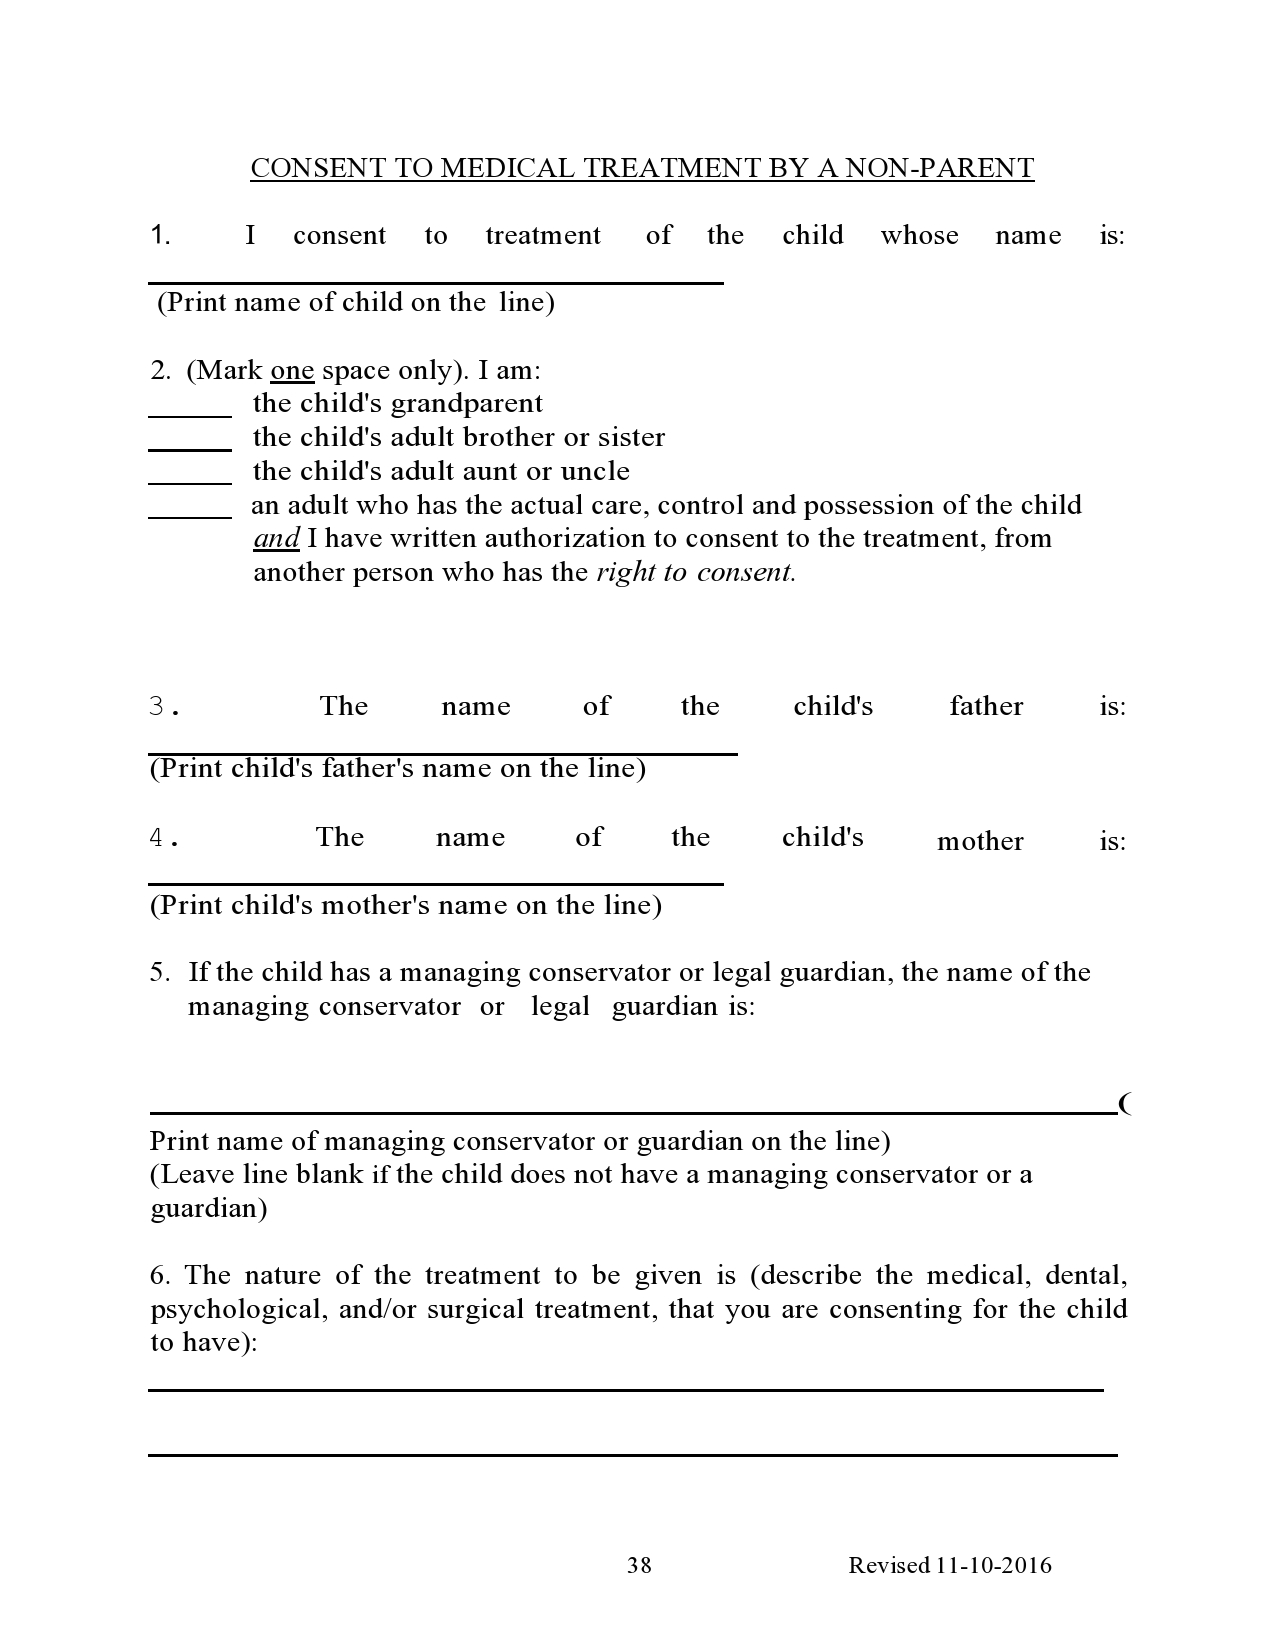 Free medical consent form for minor 11